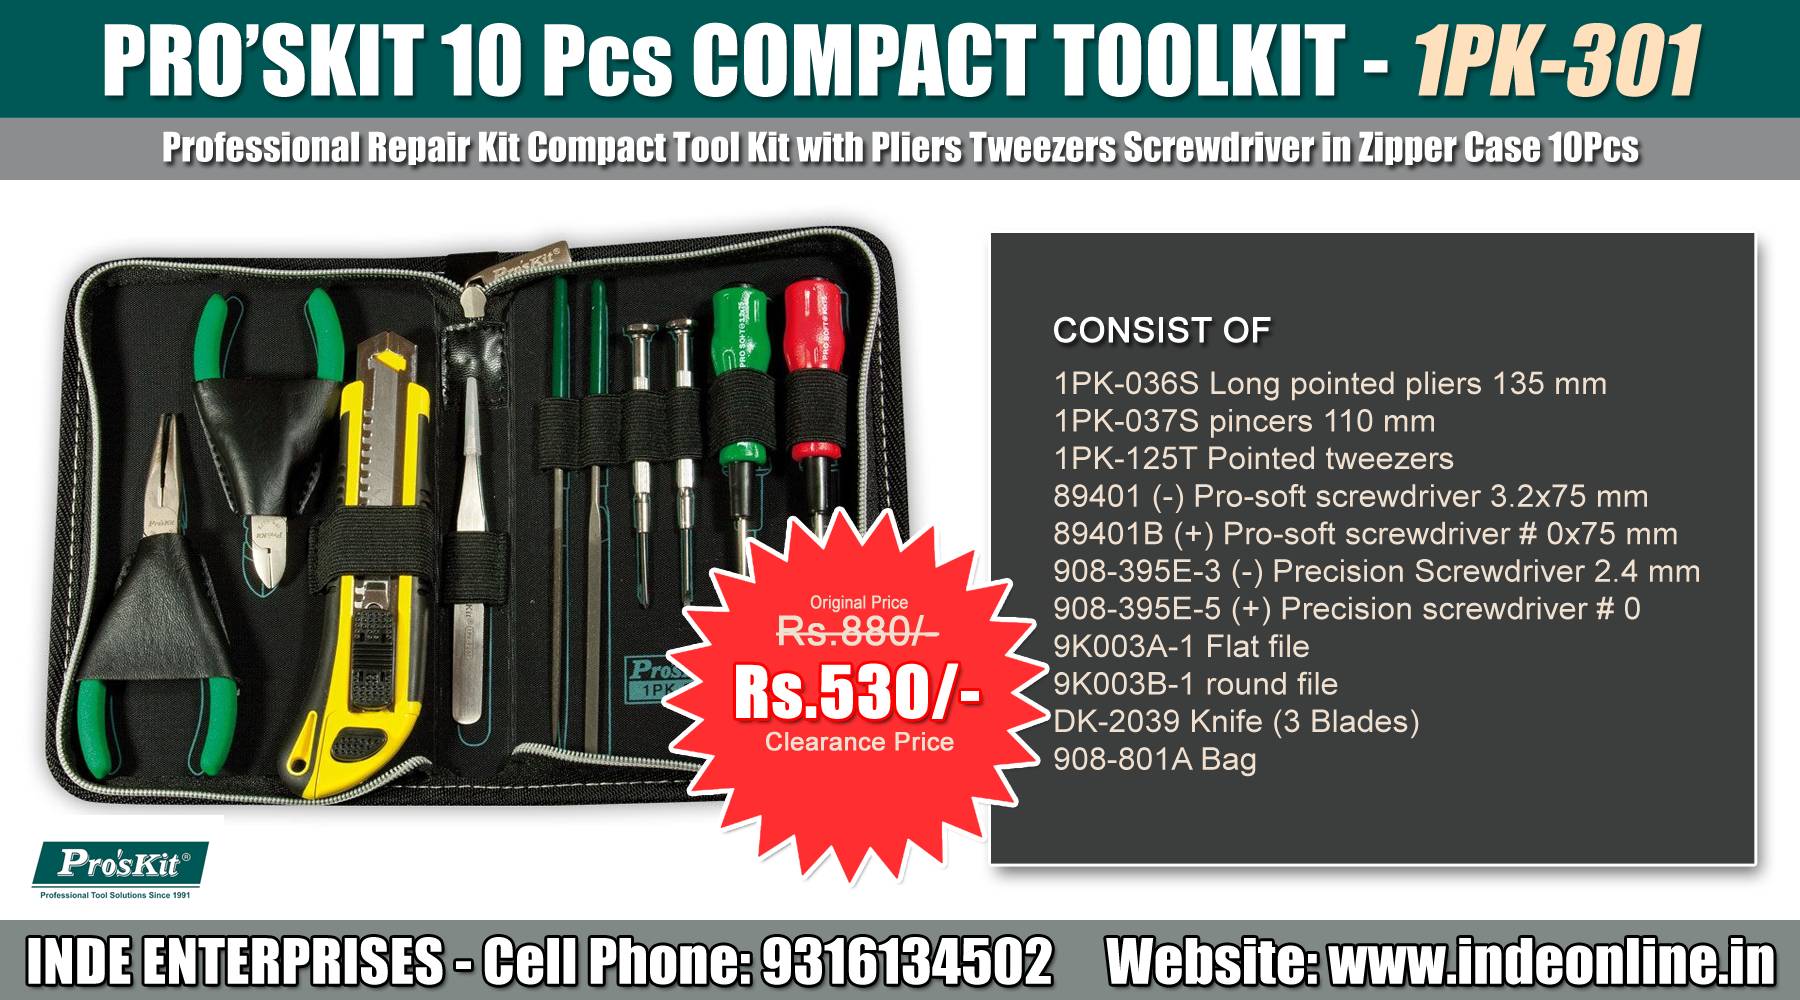 10 Pcs Proskit Compact Toolkit Price Rs.530